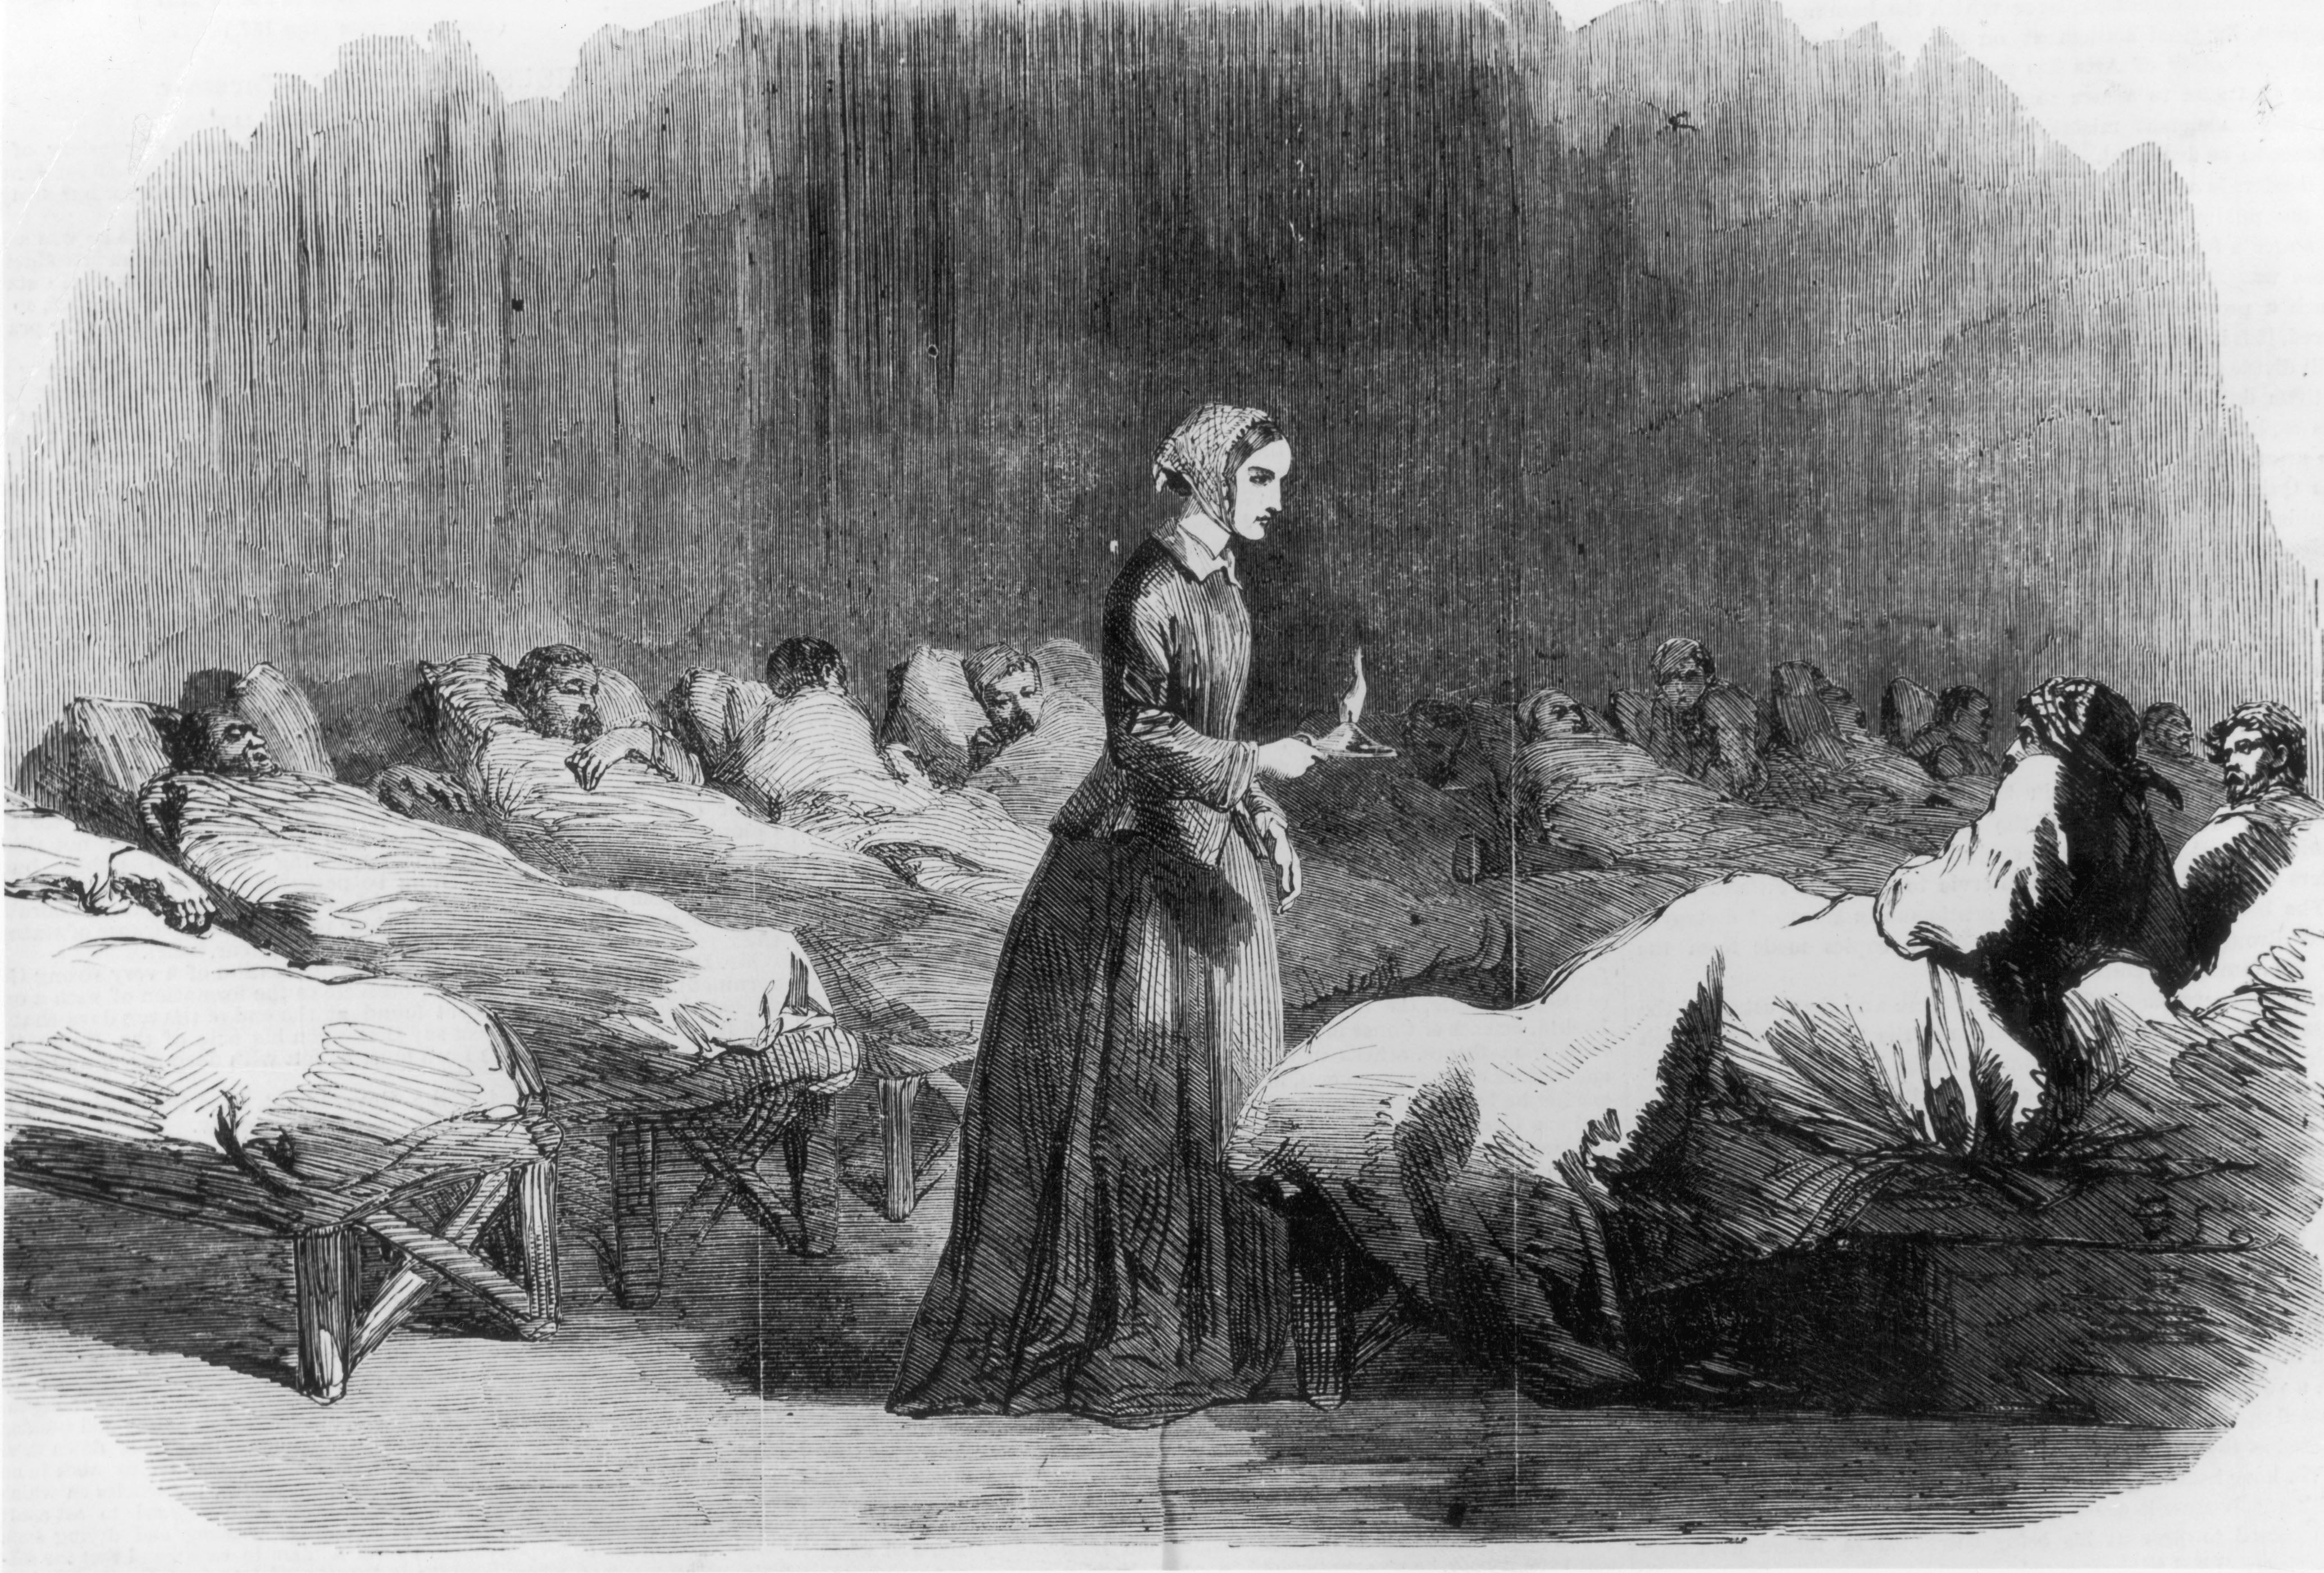 Florence Nightingale makes her rounds in the Barrack hospital at Scutari during the Crimean War, 24 February 1855